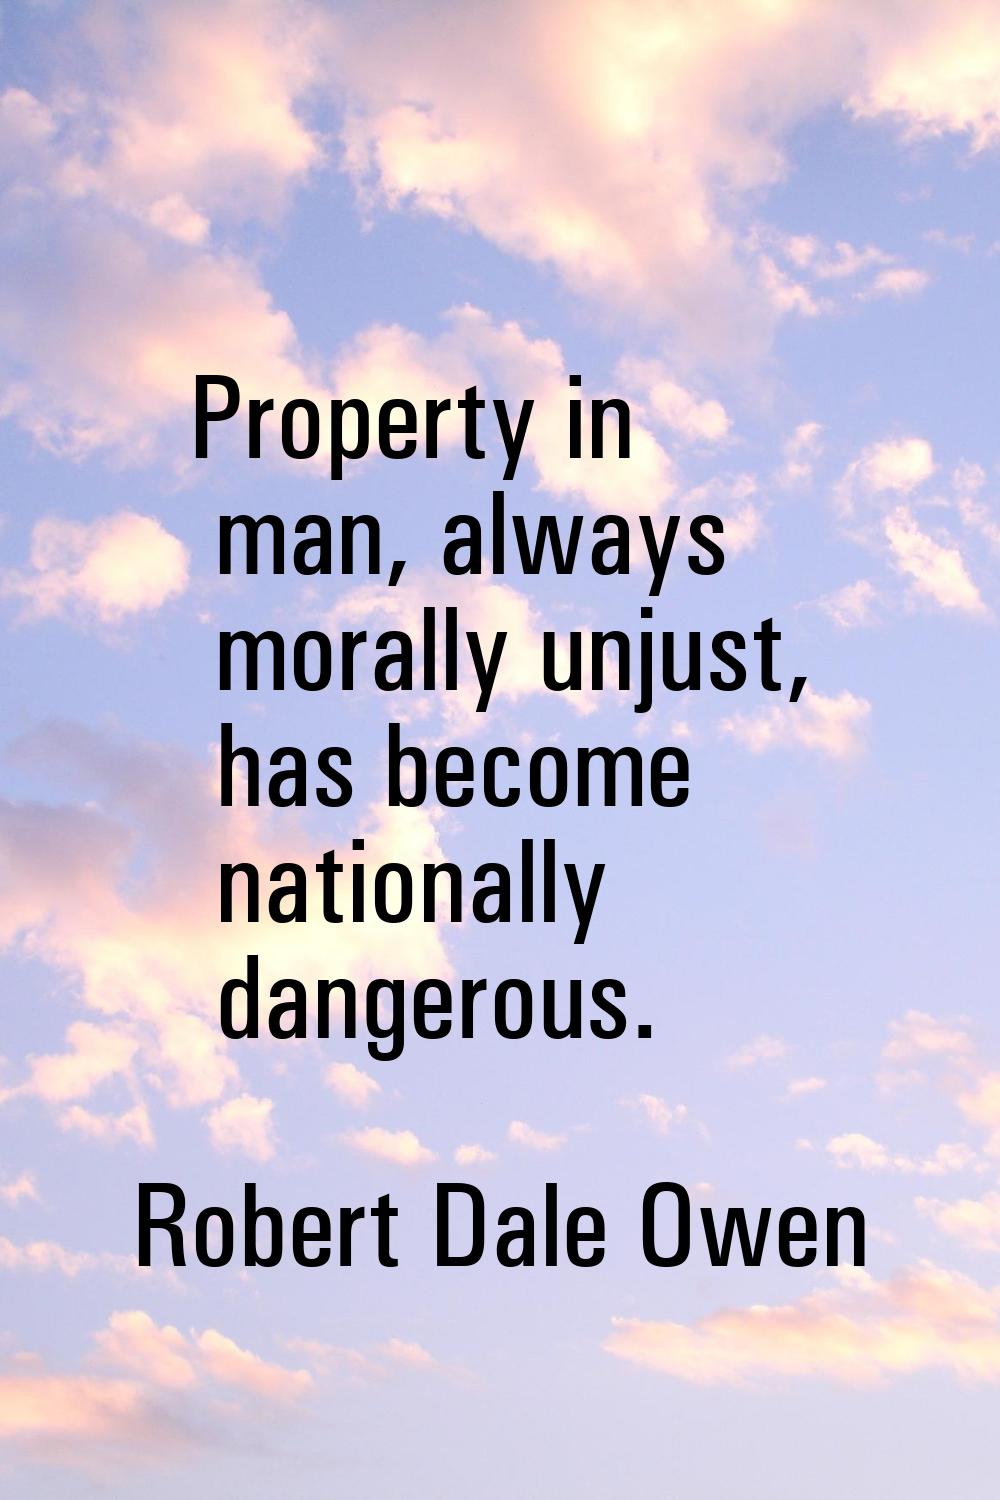 Property in man, always morally unjust, has become nationally dangerous.